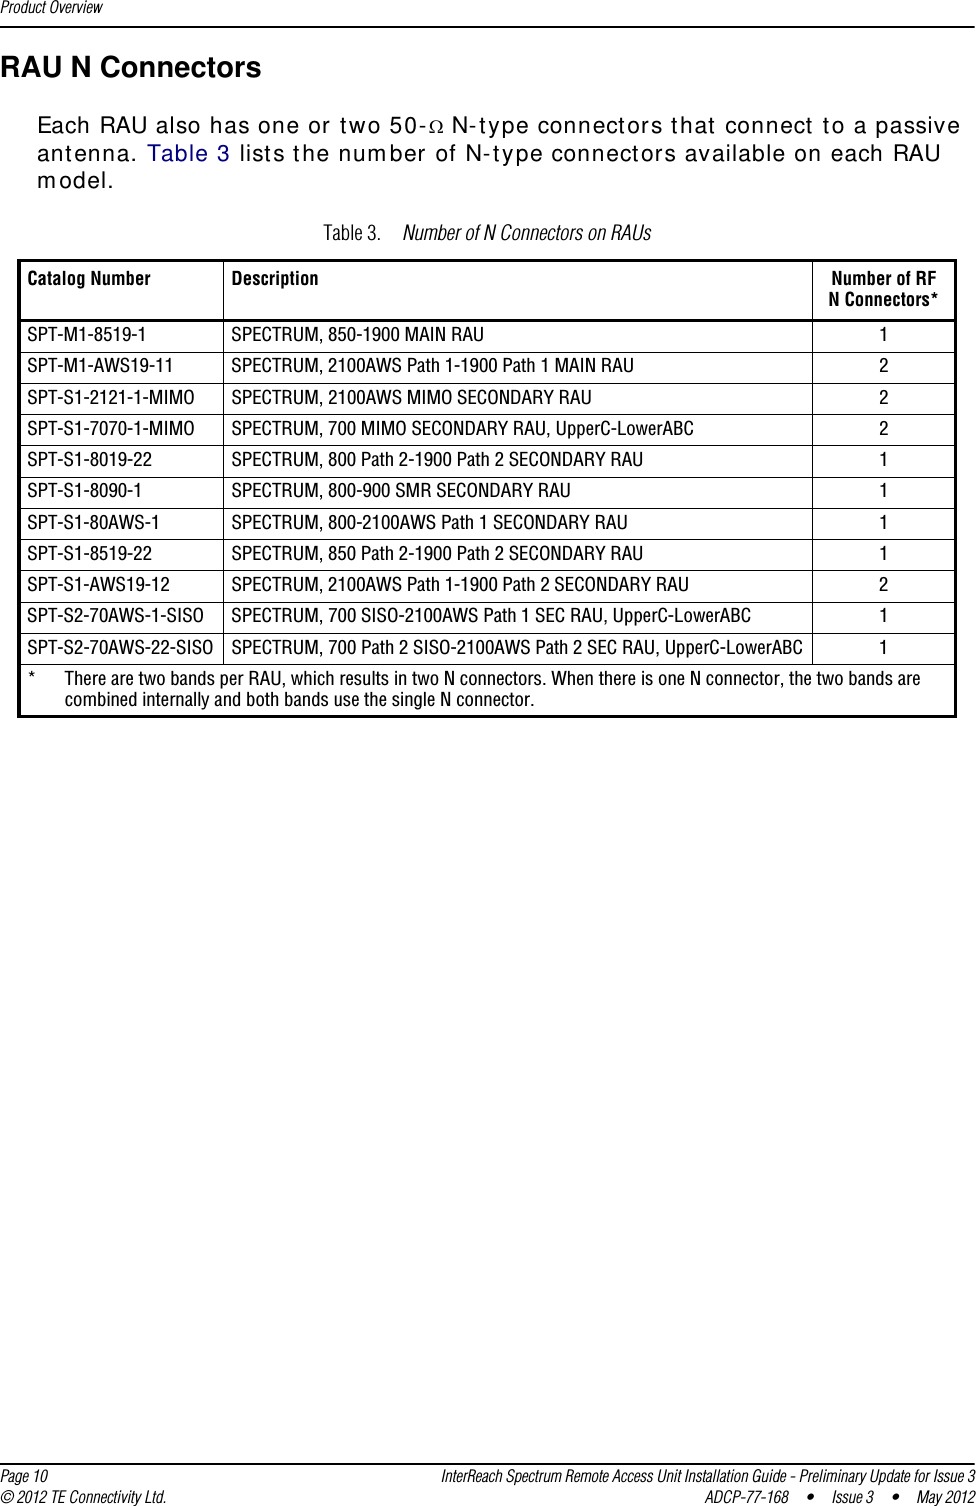 Product Overview  Page 10 InterReach Spectrum Remote Access Unit Installation Guide - Preliminary Update for Issue 3© 2012 TE Connectivity Ltd. ADCP-77-168 • Issue 3 • May 2012RAU N ConnectorsEach RAU also has one or two 50- N-type connectors that connect to a passive antenna. Table 3 lists the number of N-type connectors available on each RAU model.Table 3. Number of N Connectors on RAUsCatalog Number  Description Number of RFN Connectors*SPT-M1-8519-1 SPECTRUM, 850-1900 MAIN RAU 1SPT-M1-AWS19-11 SPECTRUM, 2100AWS Path 1-1900 Path 1 MAIN RAU  2SPT-S1-2121-1-MIMO SPECTRUM, 2100AWS MIMO SECONDARY RAU 2SPT-S1-7070-1-MIMO SPECTRUM, 700 MIMO SECONDARY RAU, UpperC-LowerABC  2SPT-S1-8019-22 SPECTRUM, 800 Path 2-1900 Path 2 SECONDARY RAU 1SPT-S1-8090-1 SPECTRUM, 800-900 SMR SECONDARY RAU 1SPT-S1-80AWS-1 SPECTRUM, 800-2100AWS Path 1 SECONDARY RAU 1SPT-S1-8519-22 SPECTRUM, 850 Path 2-1900 Path 2 SECONDARY RAU 1SPT-S1-AWS19-12 SPECTRUM, 2100AWS Path 1-1900 Path 2 SECONDARY RAU  2SPT-S2-70AWS-1-SISO SPECTRUM, 700 SISO-2100AWS Path 1 SEC RAU, UpperC-LowerABC 1SPT-S2-70AWS-22-SISO SPECTRUM, 700 Path 2 SISO-2100AWS Path 2 SEC RAU, UpperC-LowerABC 1* There are two bands per RAU, which results in two N connectors. When there is one N connector, the two bands are combined internally and both bands use the single N connector.